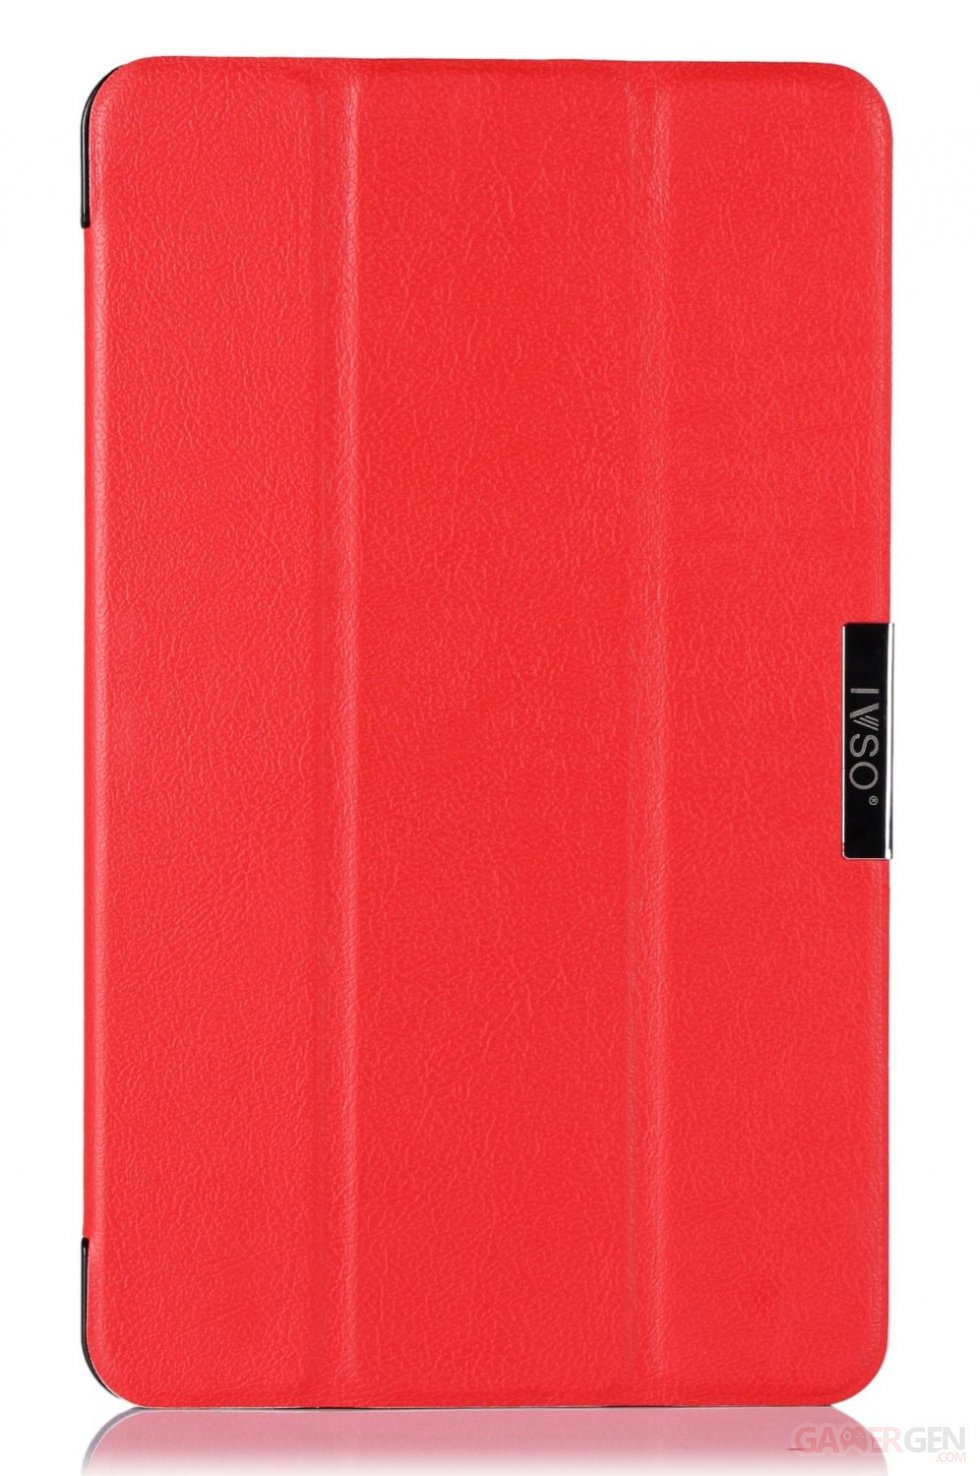 surface_mini_cover_red